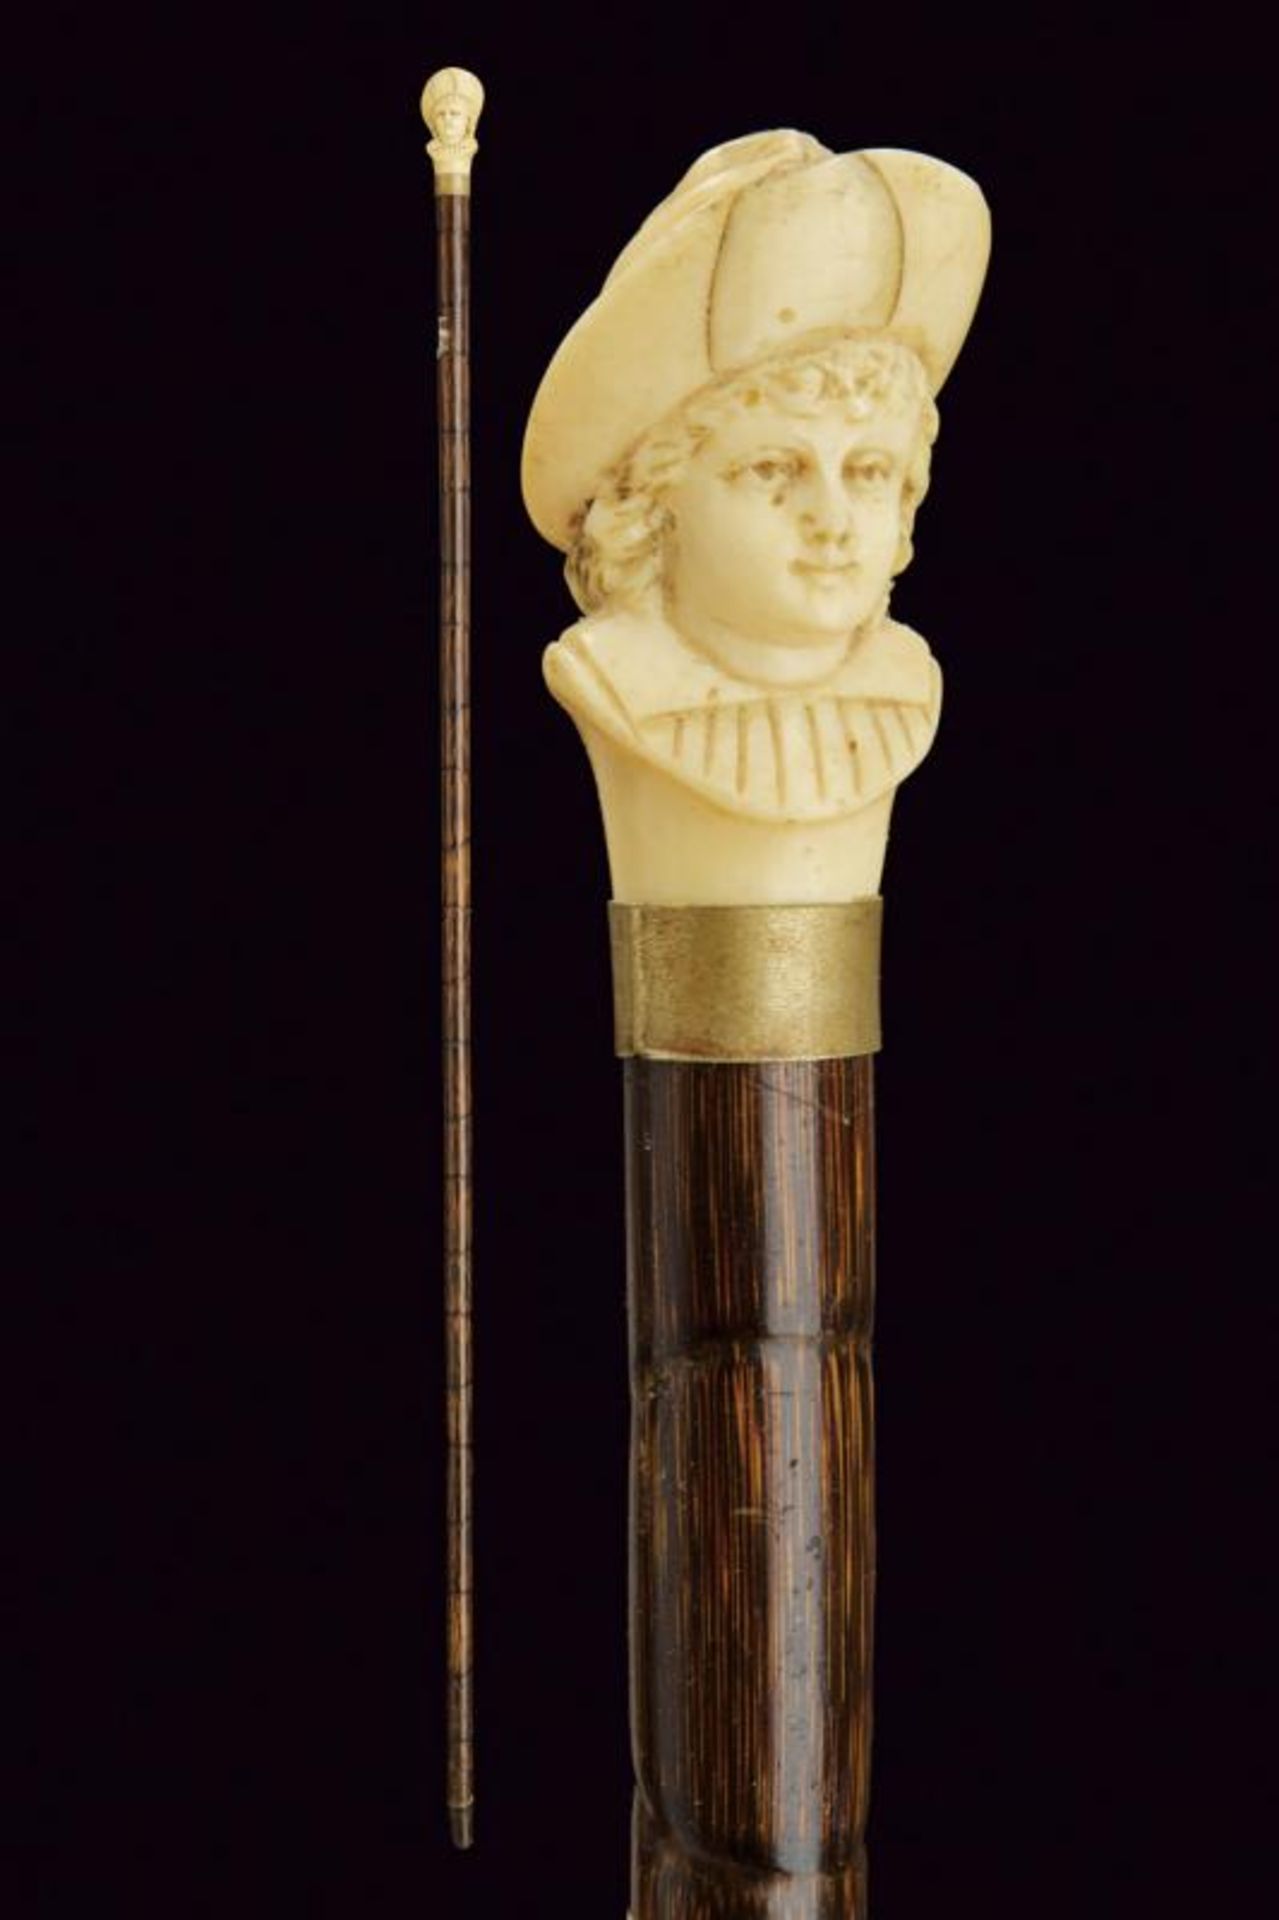 A walking stick with carved ivory grip